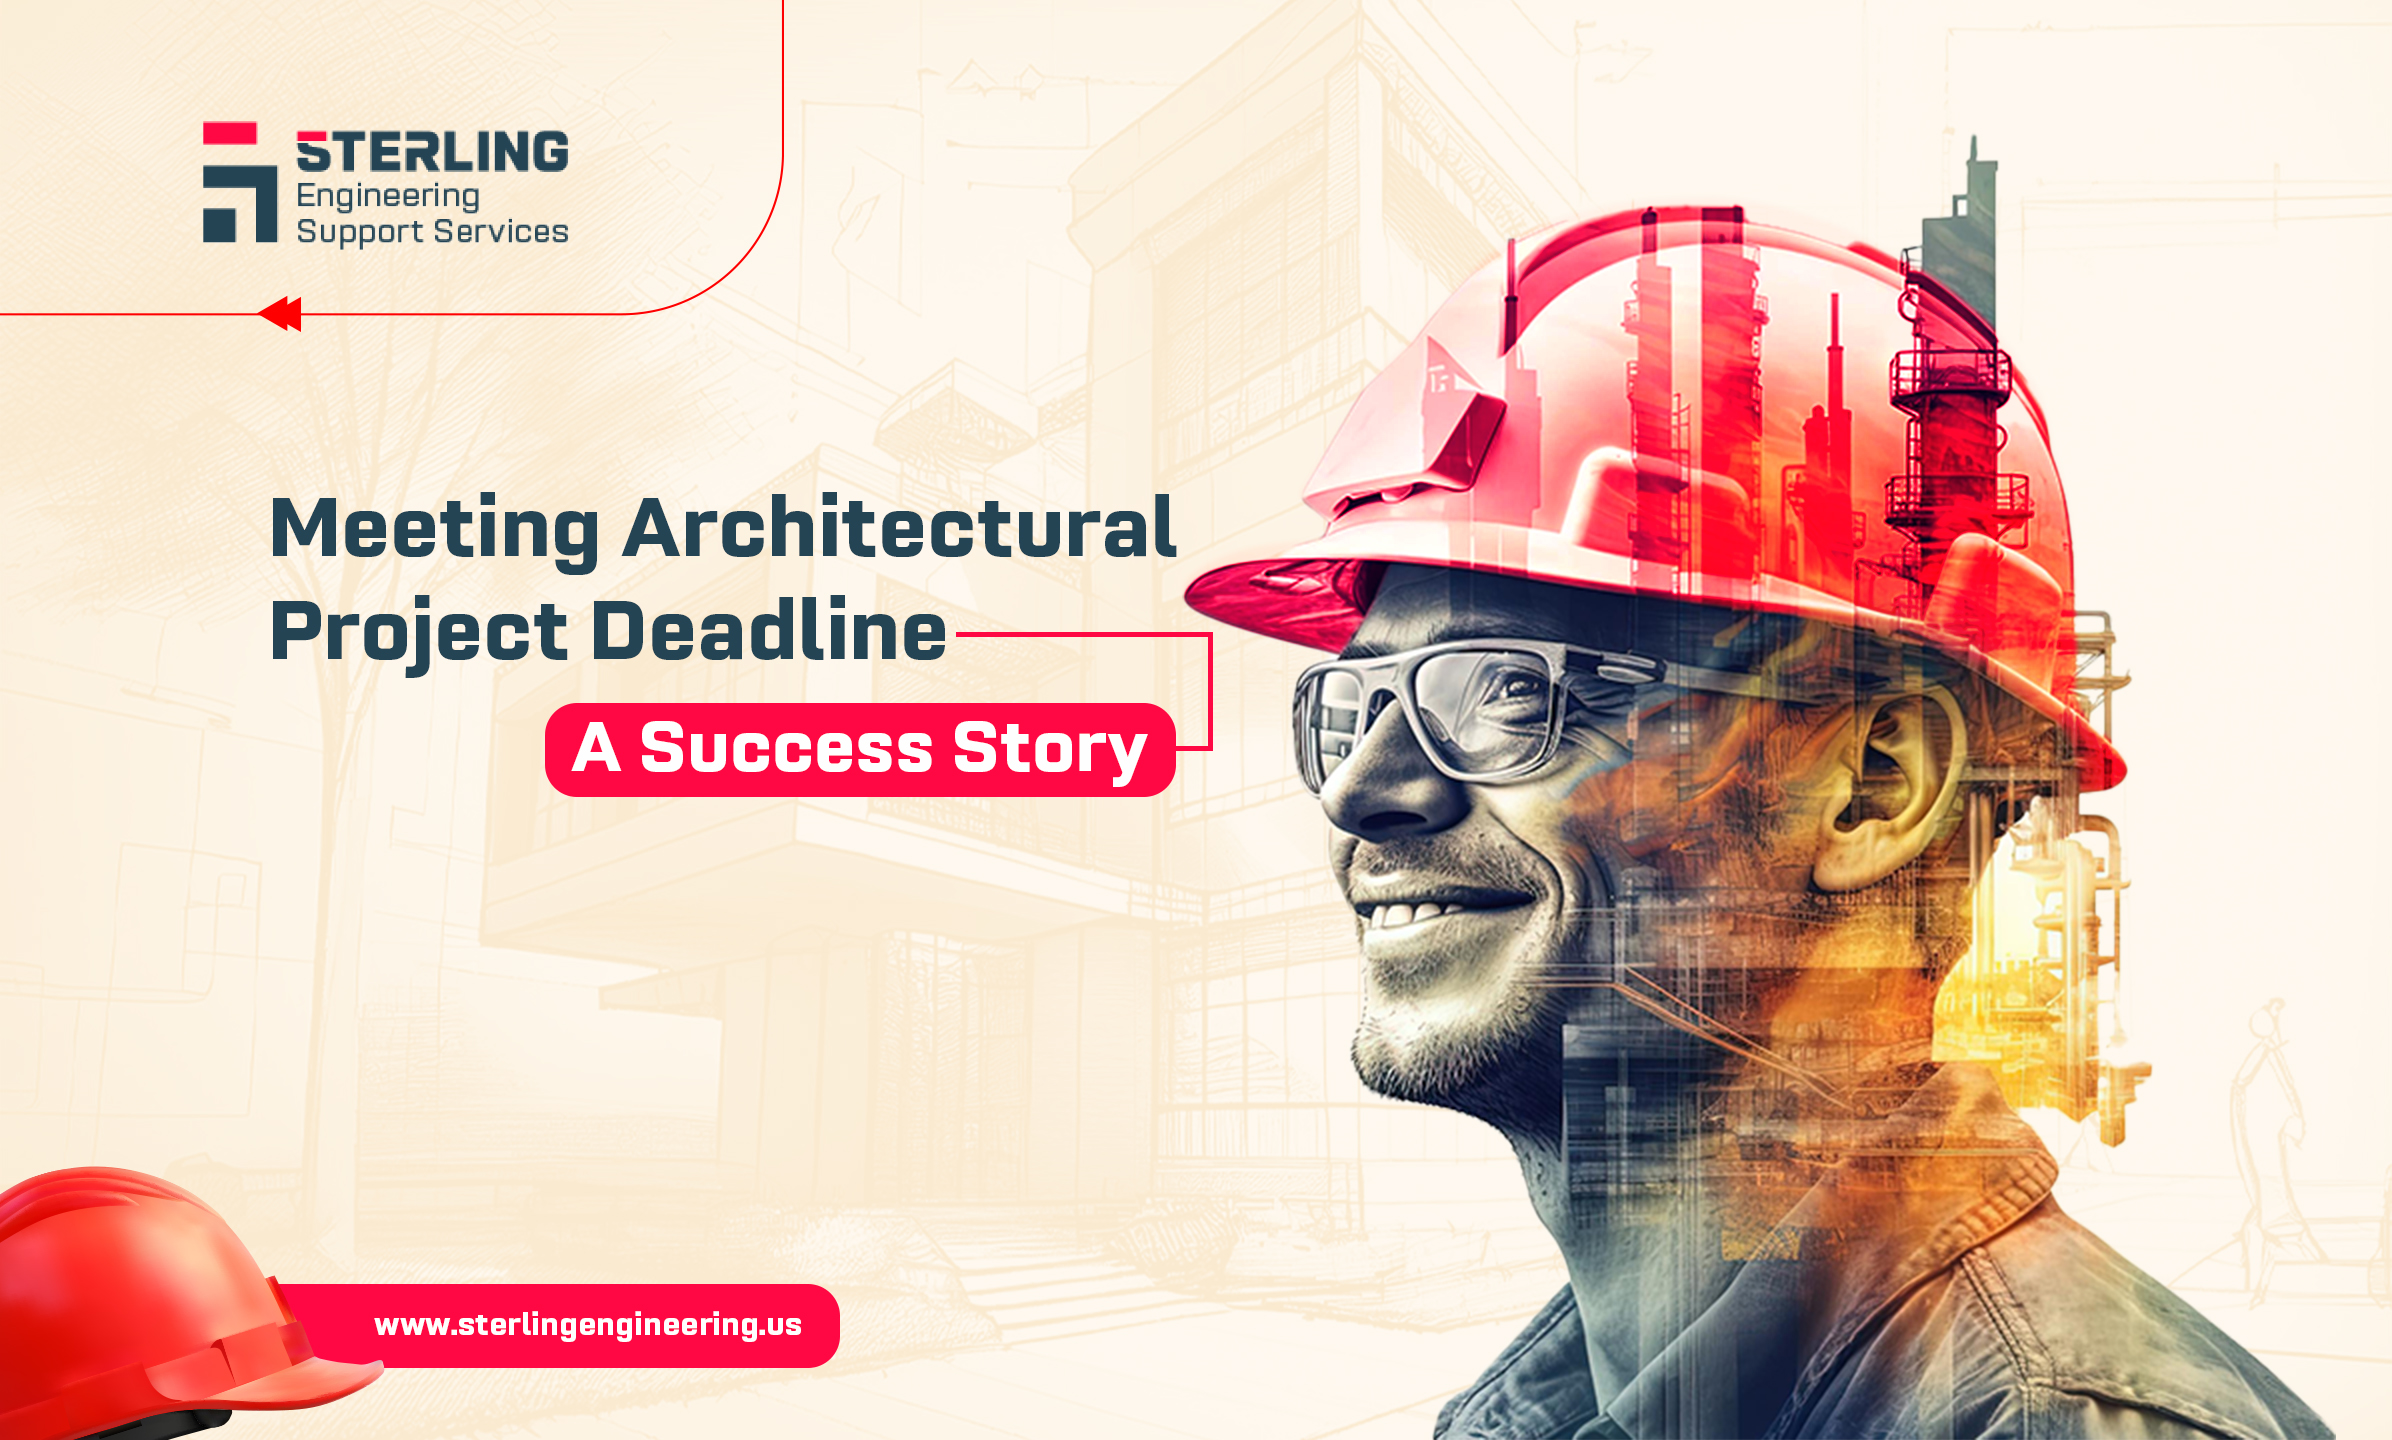 How We Delivered on an Architectural Project Within a Tight Timeline